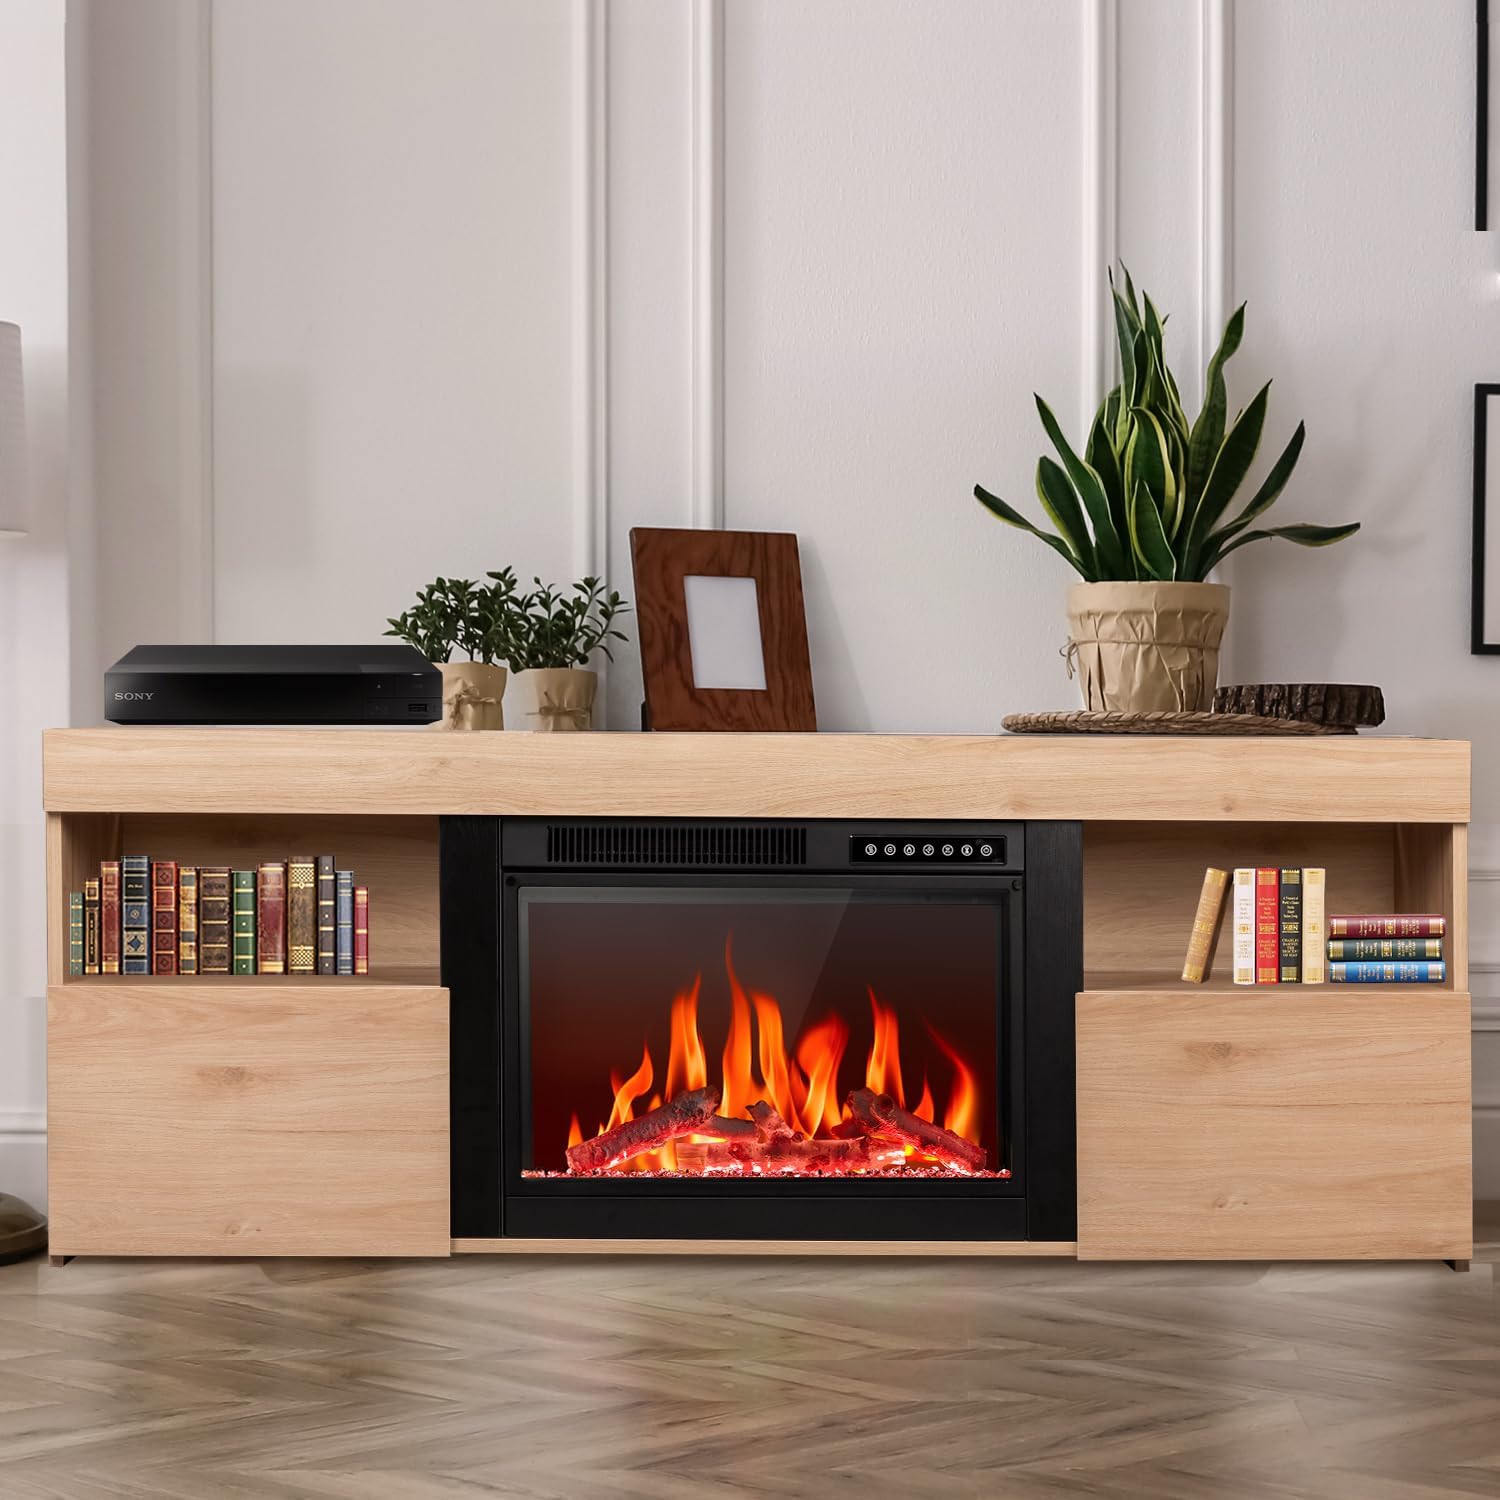 R.W.FLAME 59" Electric Fireplace Mantel TV Stand with Remote, Adjustable Flame, Timer, 750W-1500W